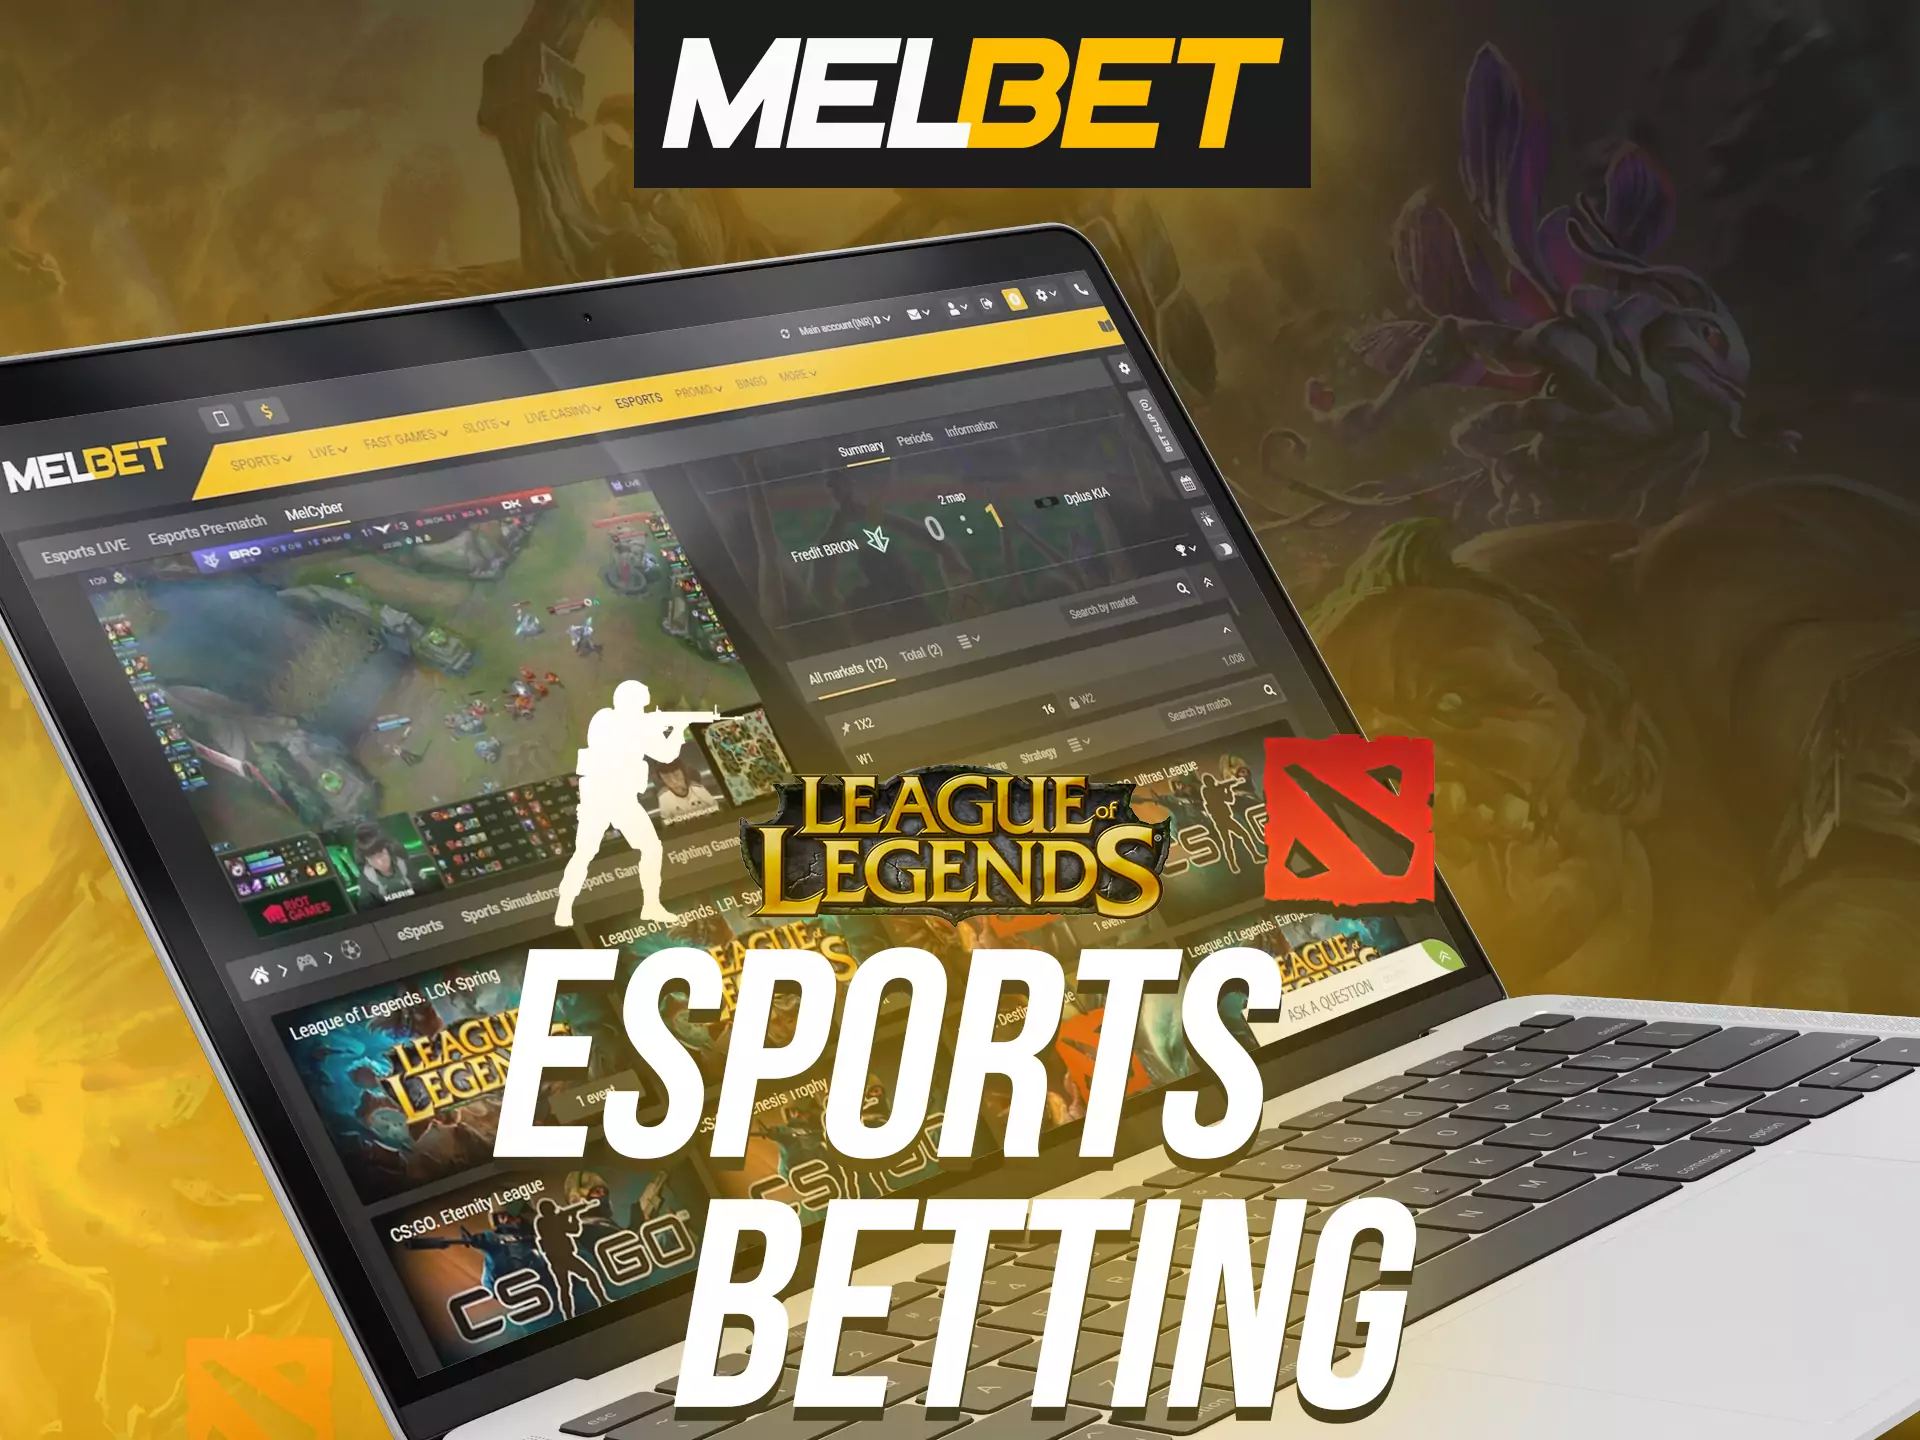 Choose your favourite esports team and make bet at Melbet.